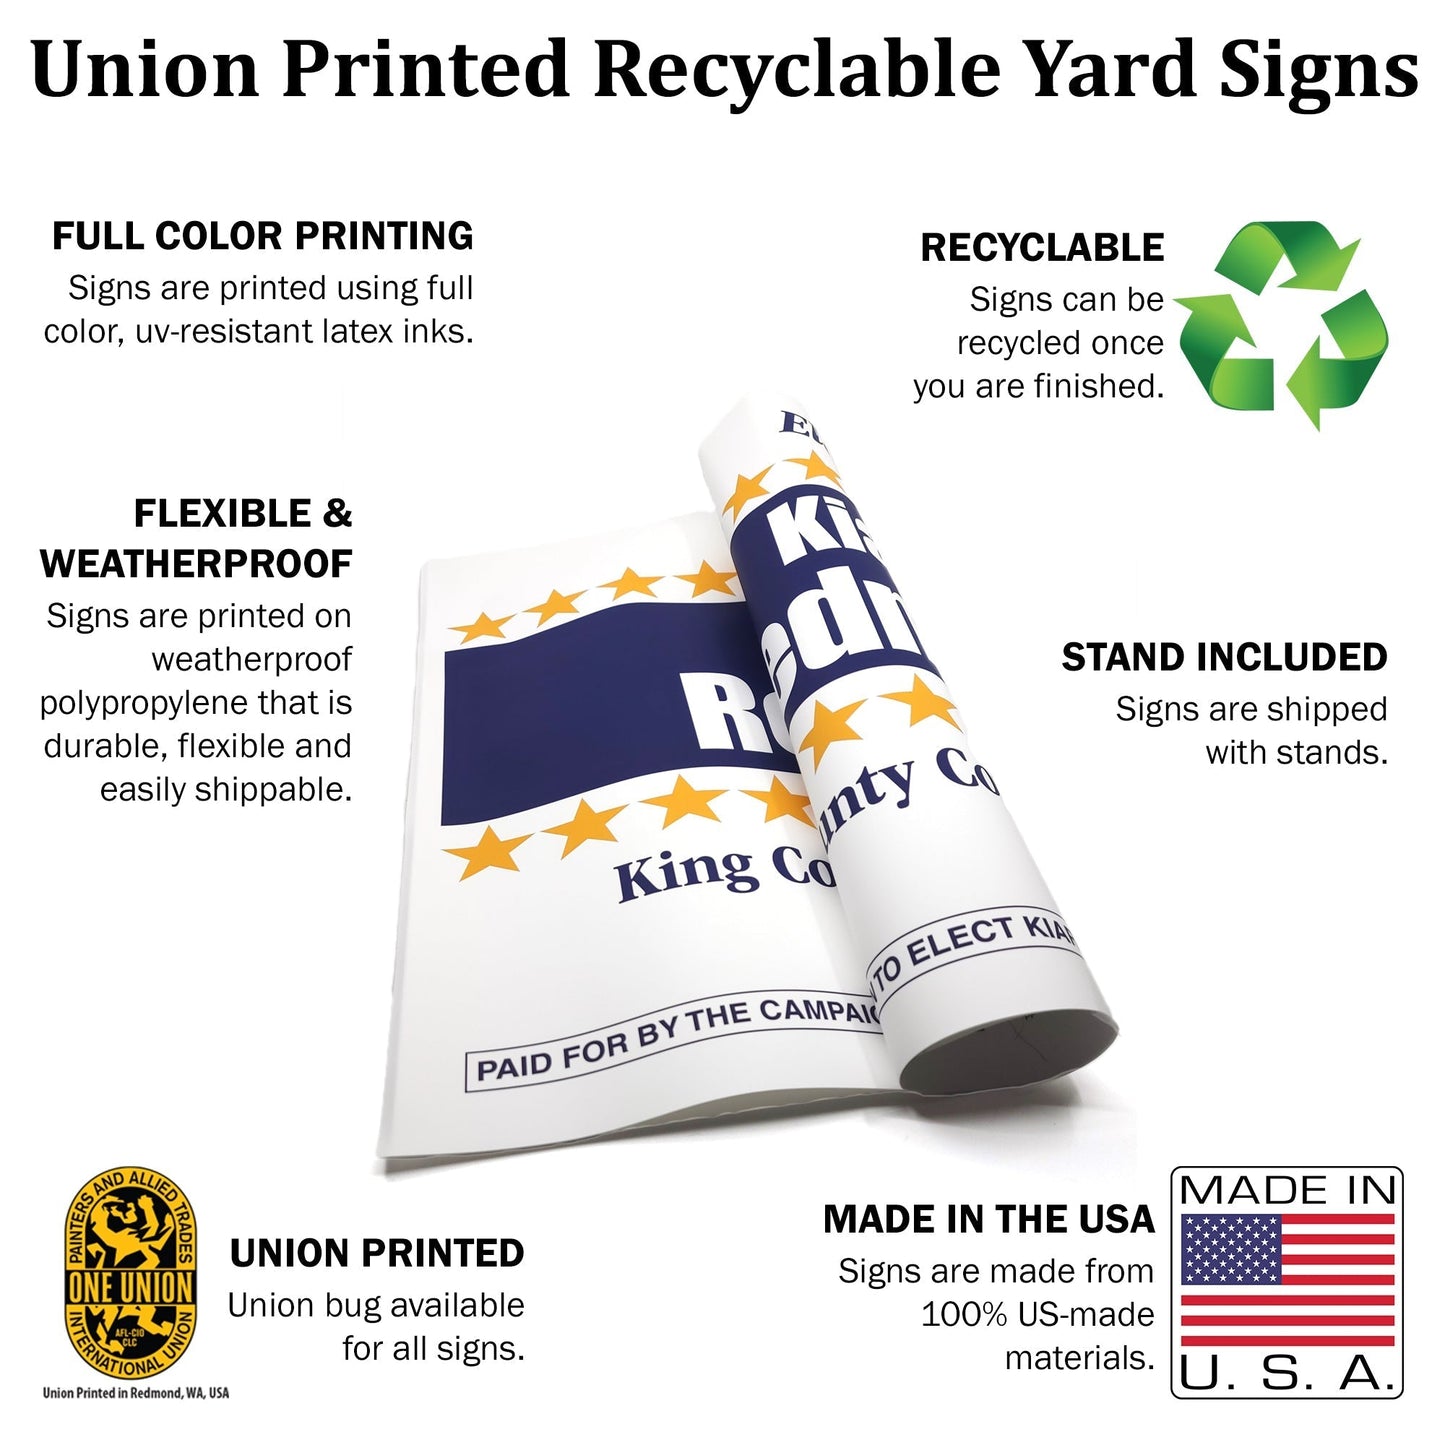 MerchBlue Union-Printed Yard Sign - 24x18 - DemParty design - Recyclable - Made in the USA